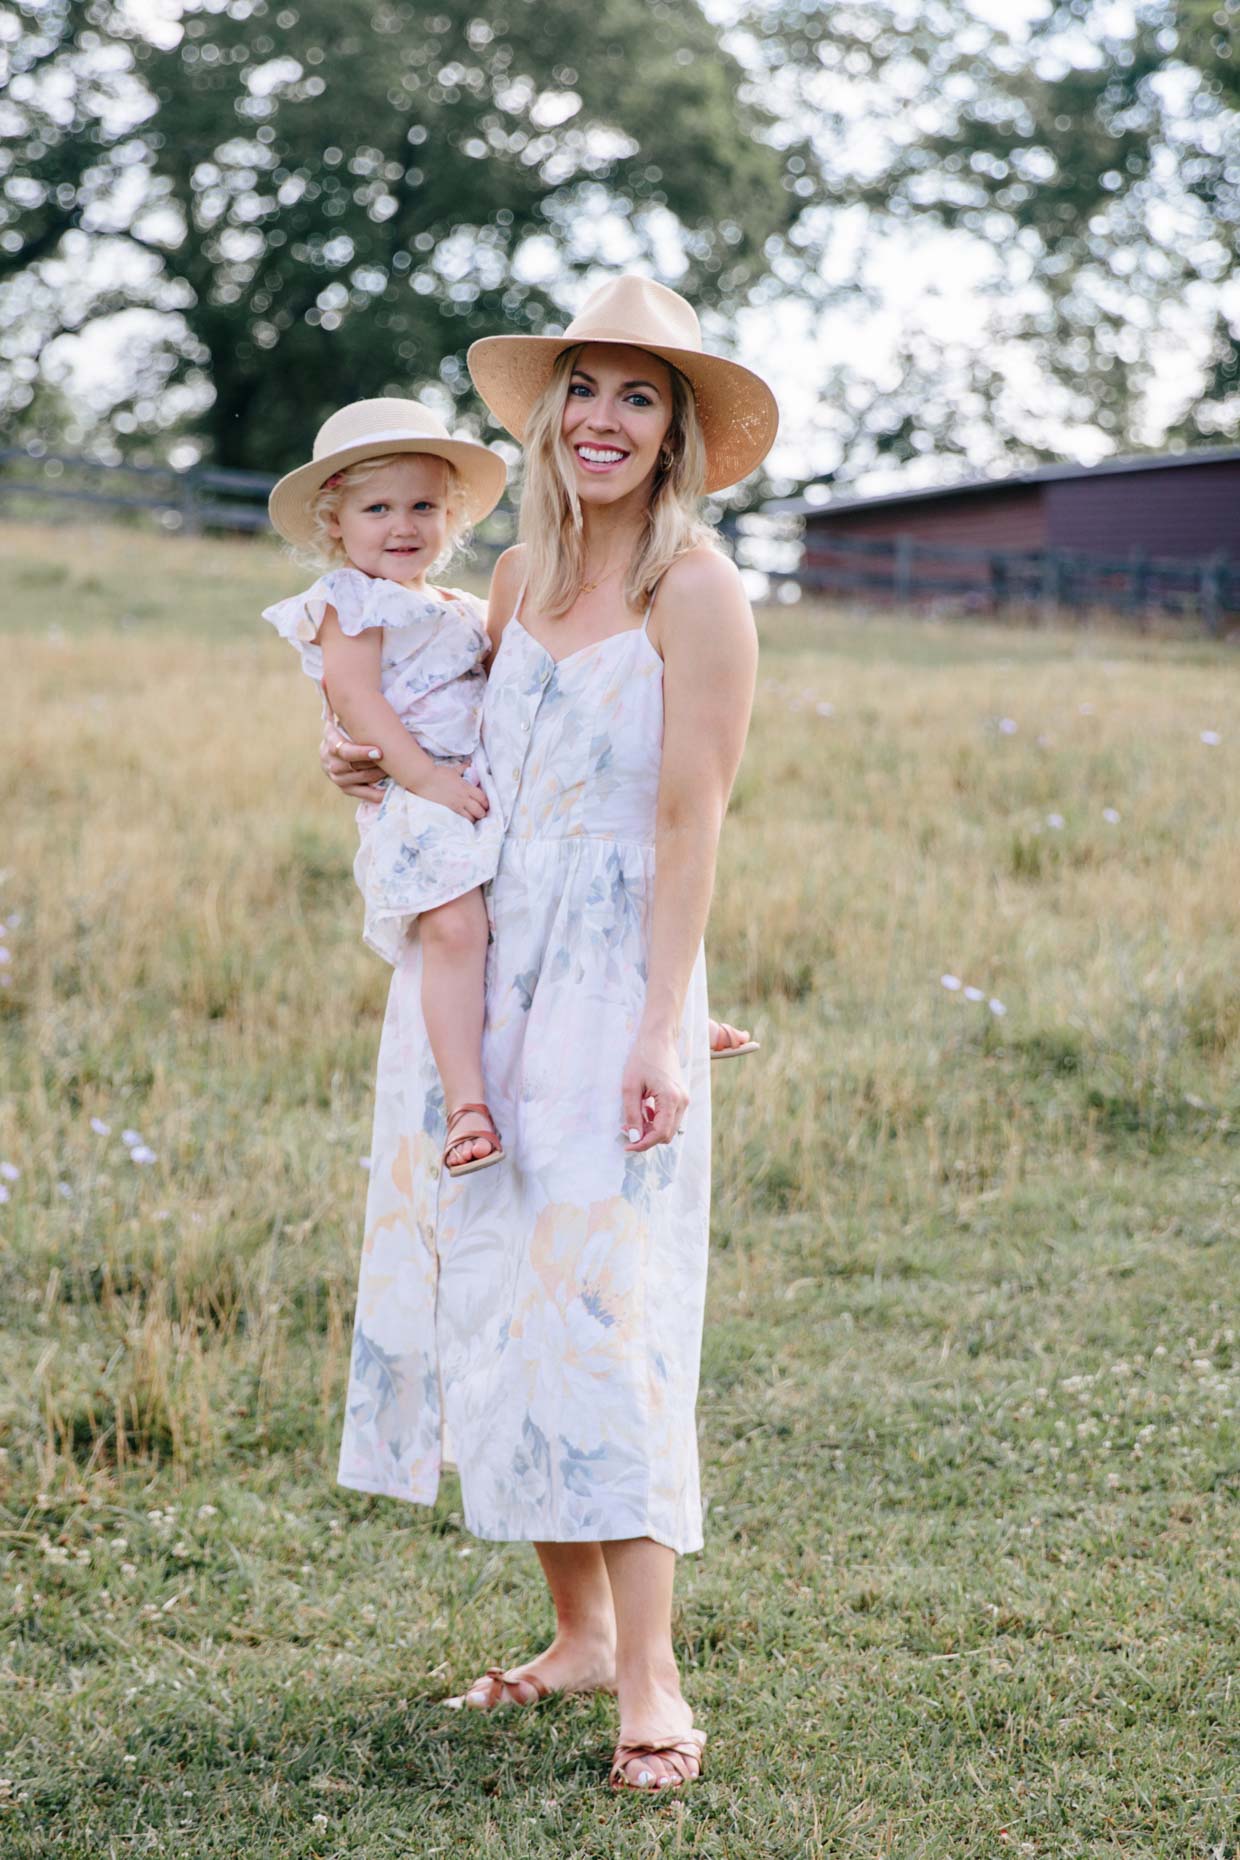 Meagan Brandon fashion blogger of Meagan's Moda wears H&M Mom and Mini floral print dresses with daughter